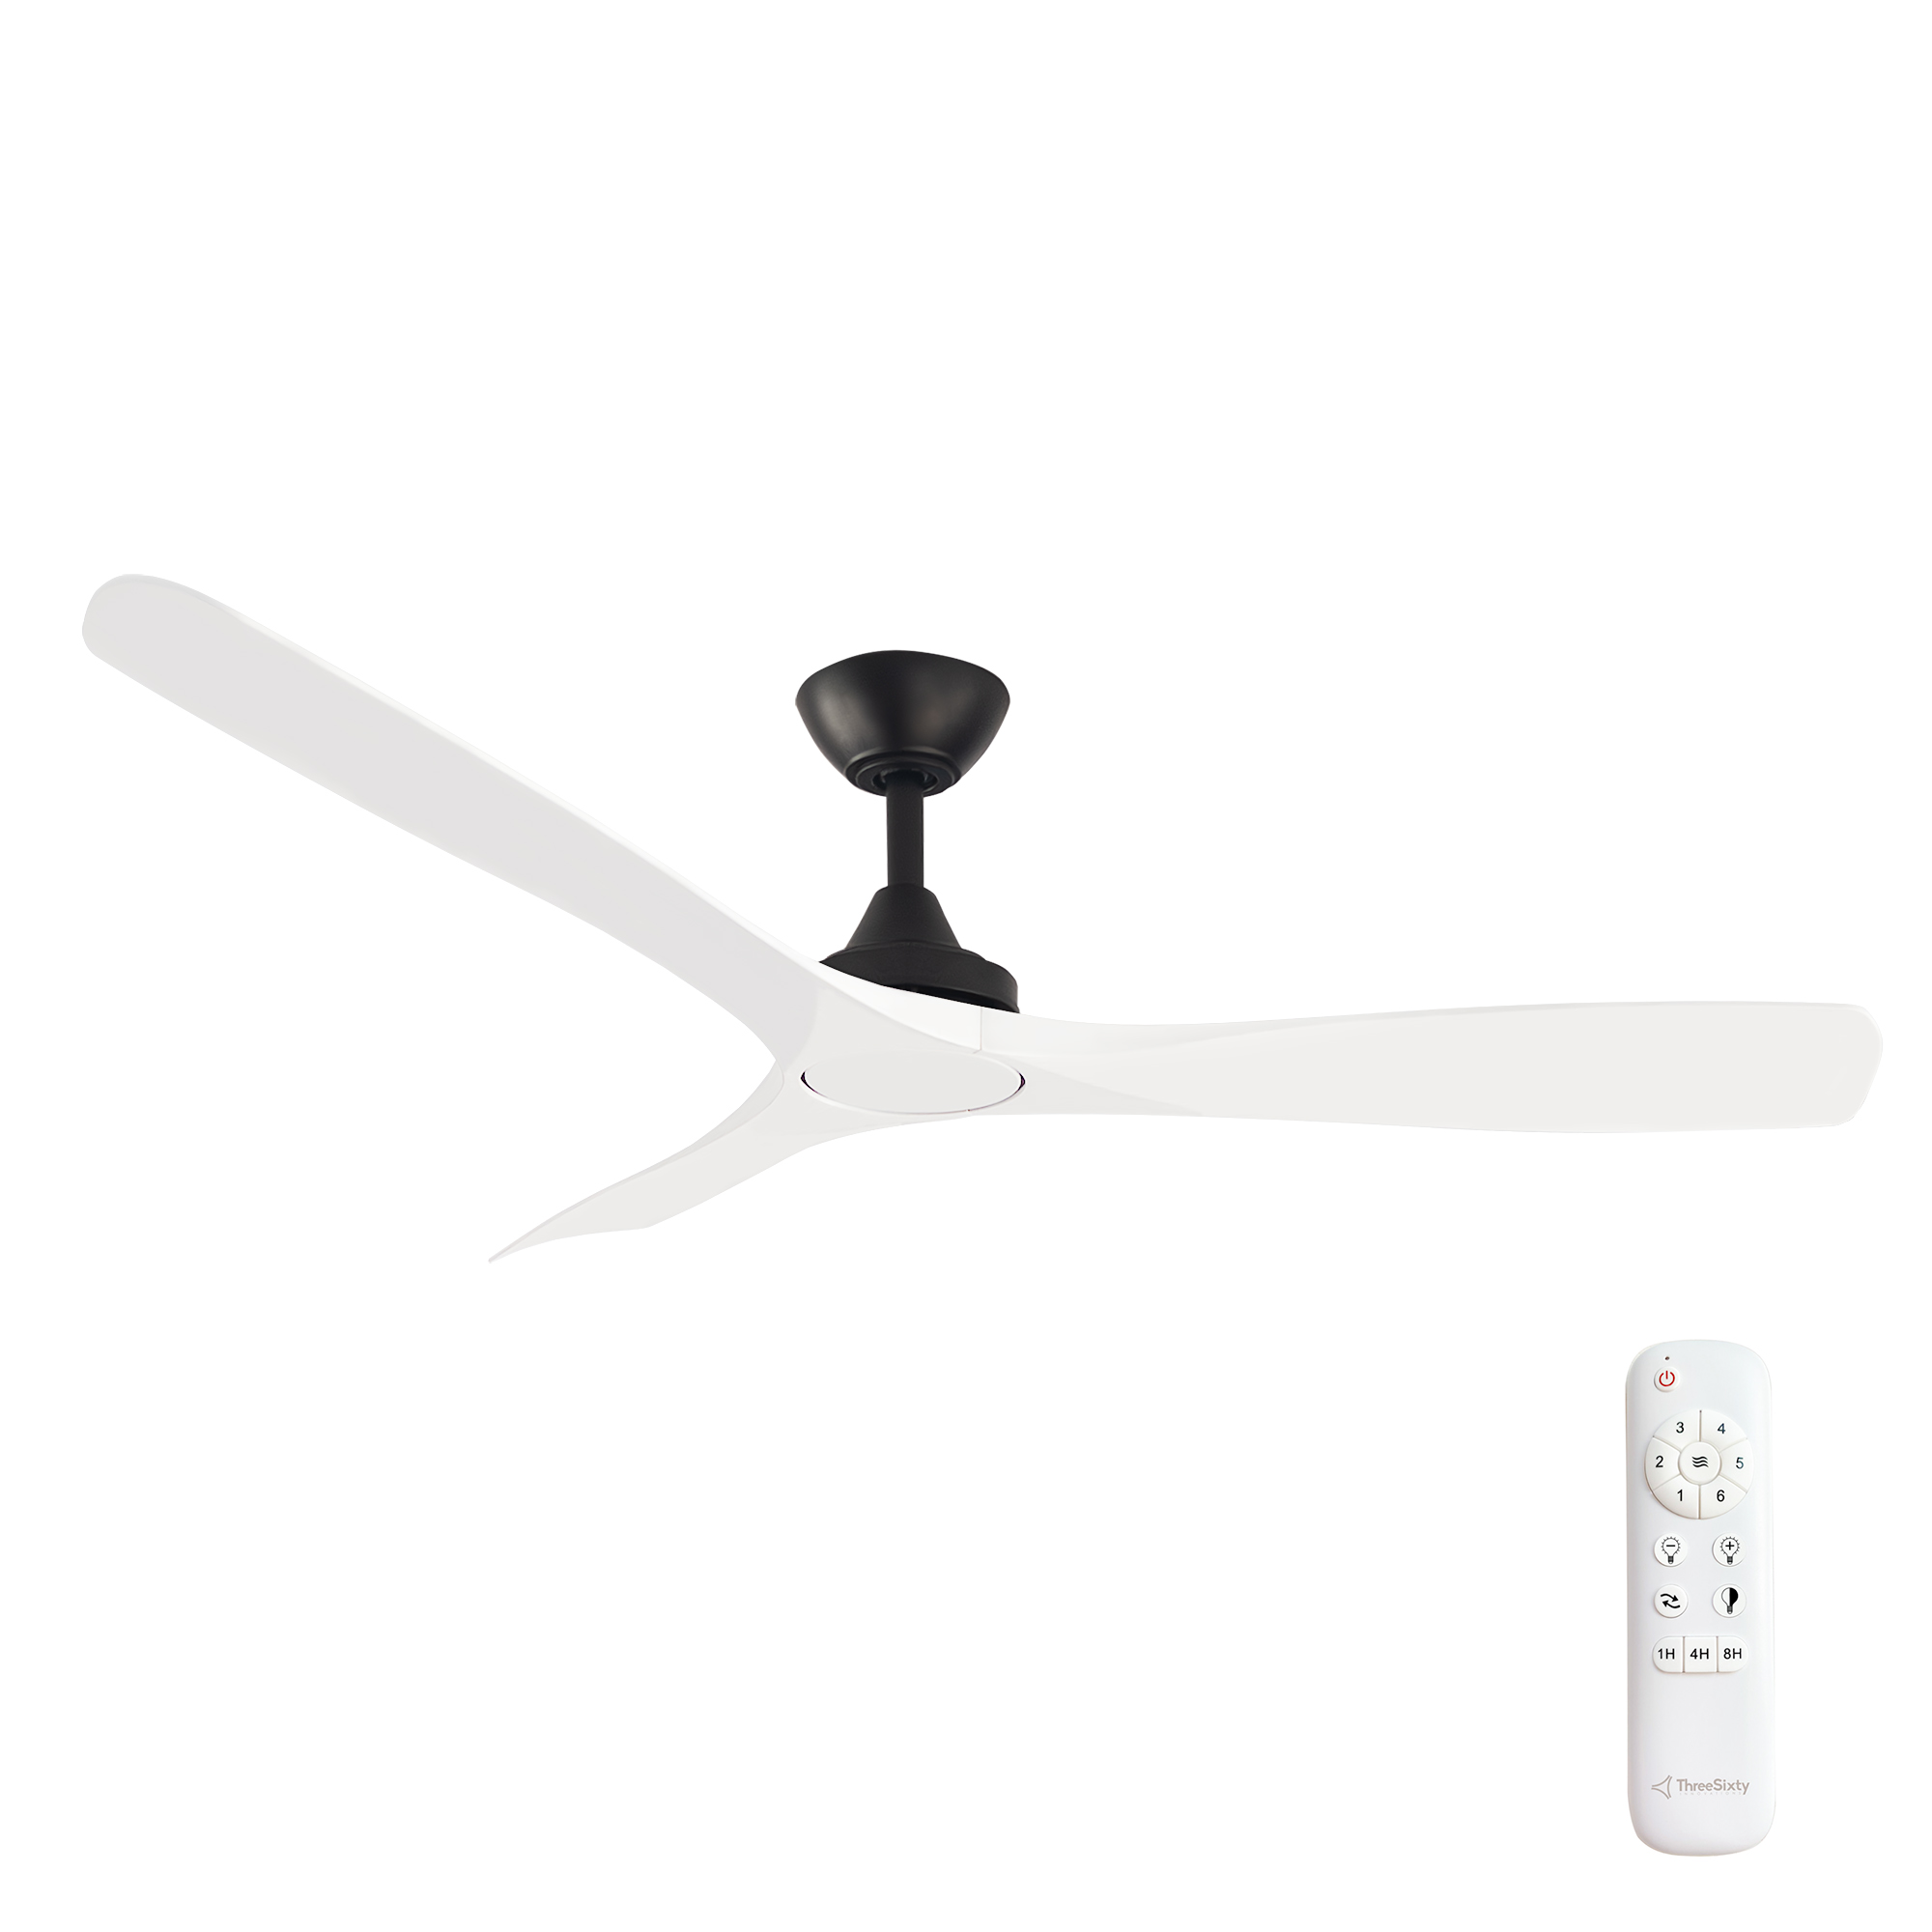 52" Spitfire DC Ceiling Fan in Black with White blades